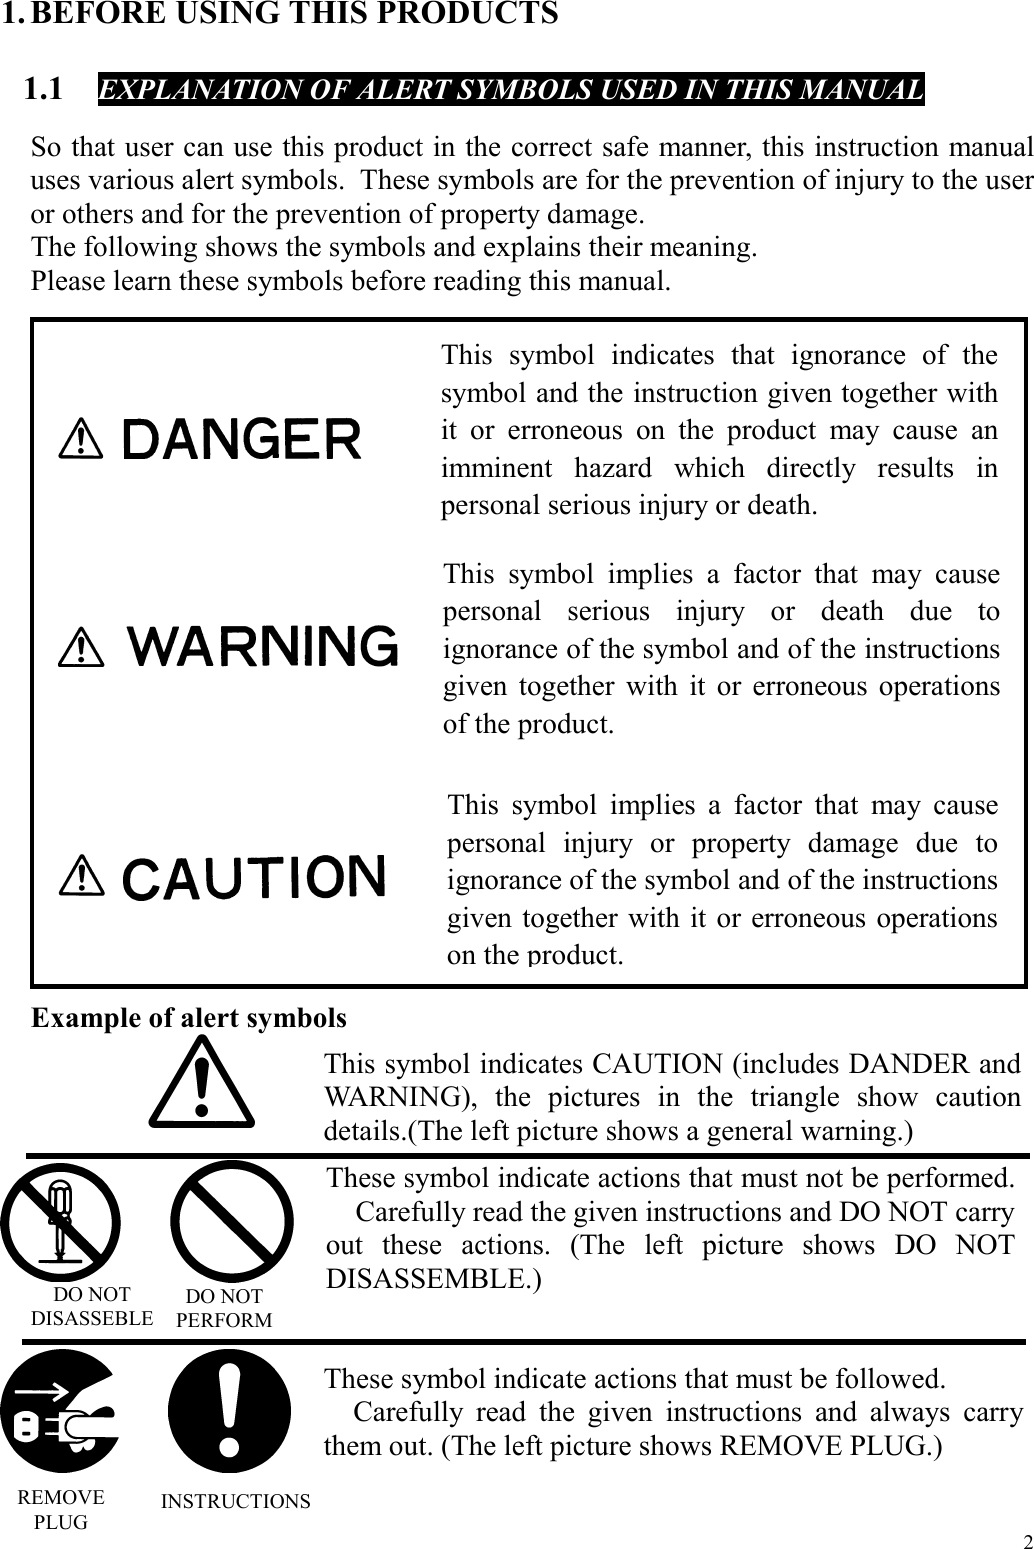  2 1. BEFORE USING THIS PRODUCTS  1.1  EXPLANATION OF ALERT SYMBOLS USED IN THIS MANUAL  So that user can use this product in the correct safe manner, this instruction manual uses various alert symbols.  These symbols are for the prevention of injury to the user or others and for the prevention of property damage. The following shows the symbols and explains their meaning. Please learn these symbols before reading this manual.                       Example of alert symbols                                    This symbol indicates that ignorance of thesymbol and the instruction given together withit or erroneous on the product may cause animminent hazard which directly results inpersonal serious injury or death. This symbol implies a factor that may cause personal serious injury or death due to ignorance of the symbol and of the instructions given together with it or erroneous operations of the product. This symbol implies a factor that may causepersonal injury or property damage due toignorance of the symbol and of the instructionsgiven together with it or erroneous operationson the product. This symbol indicates CAUTION (includes DANDER and WARNING), the pictures in the triangle show caution details.(The left picture shows a general warning.) These symbol indicate actions that must not be performed.  Carefully read the given instructions and DO NOT carry out these actions. (The left picture shows DO NOT DISASSEMBLE.) These symbol indicate actions that must be followed.   Carefully read the given instructions and always carry them out. (The left picture shows REMOVE PLUG.) DO NOT DISASSEBLE DO NOT PERFORM REMOVE PLUG INSTRUCTIONS 